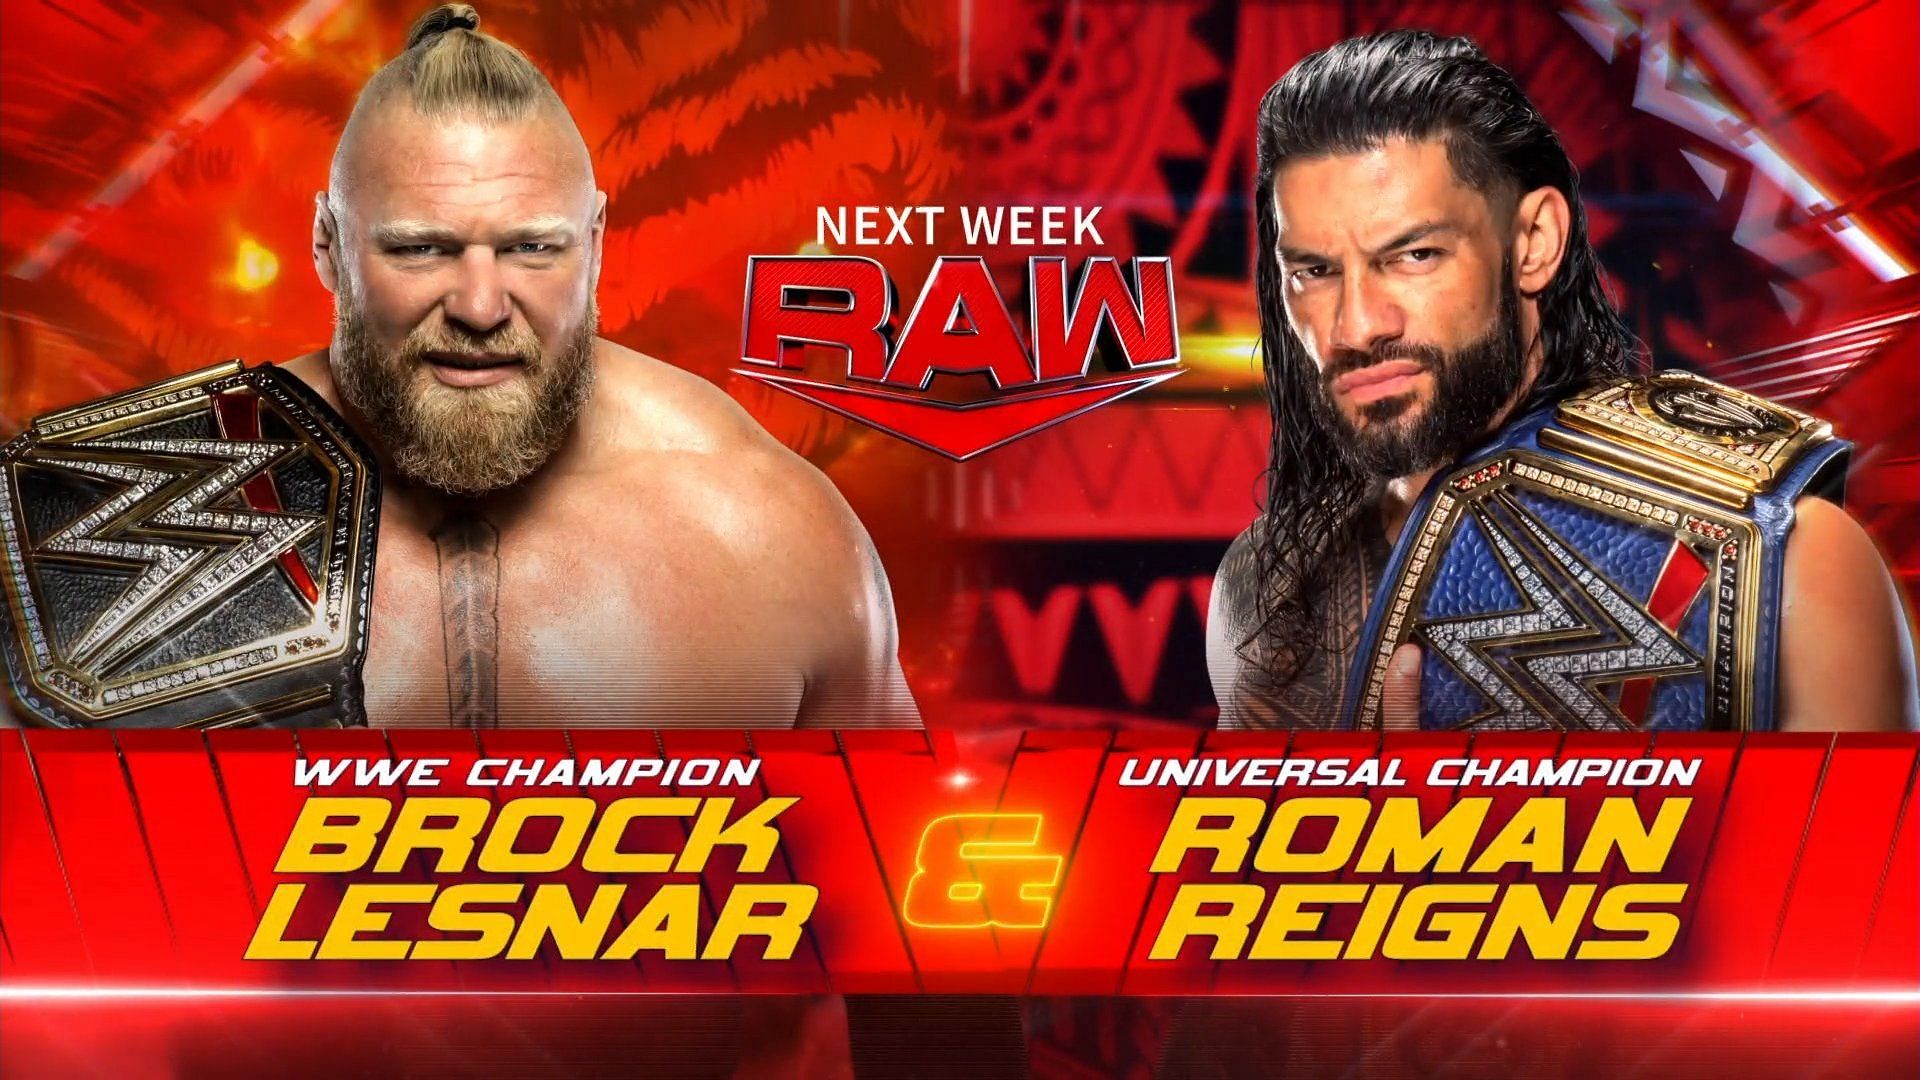 Brock Lesnar and Roman Reigns will be at RAW next week